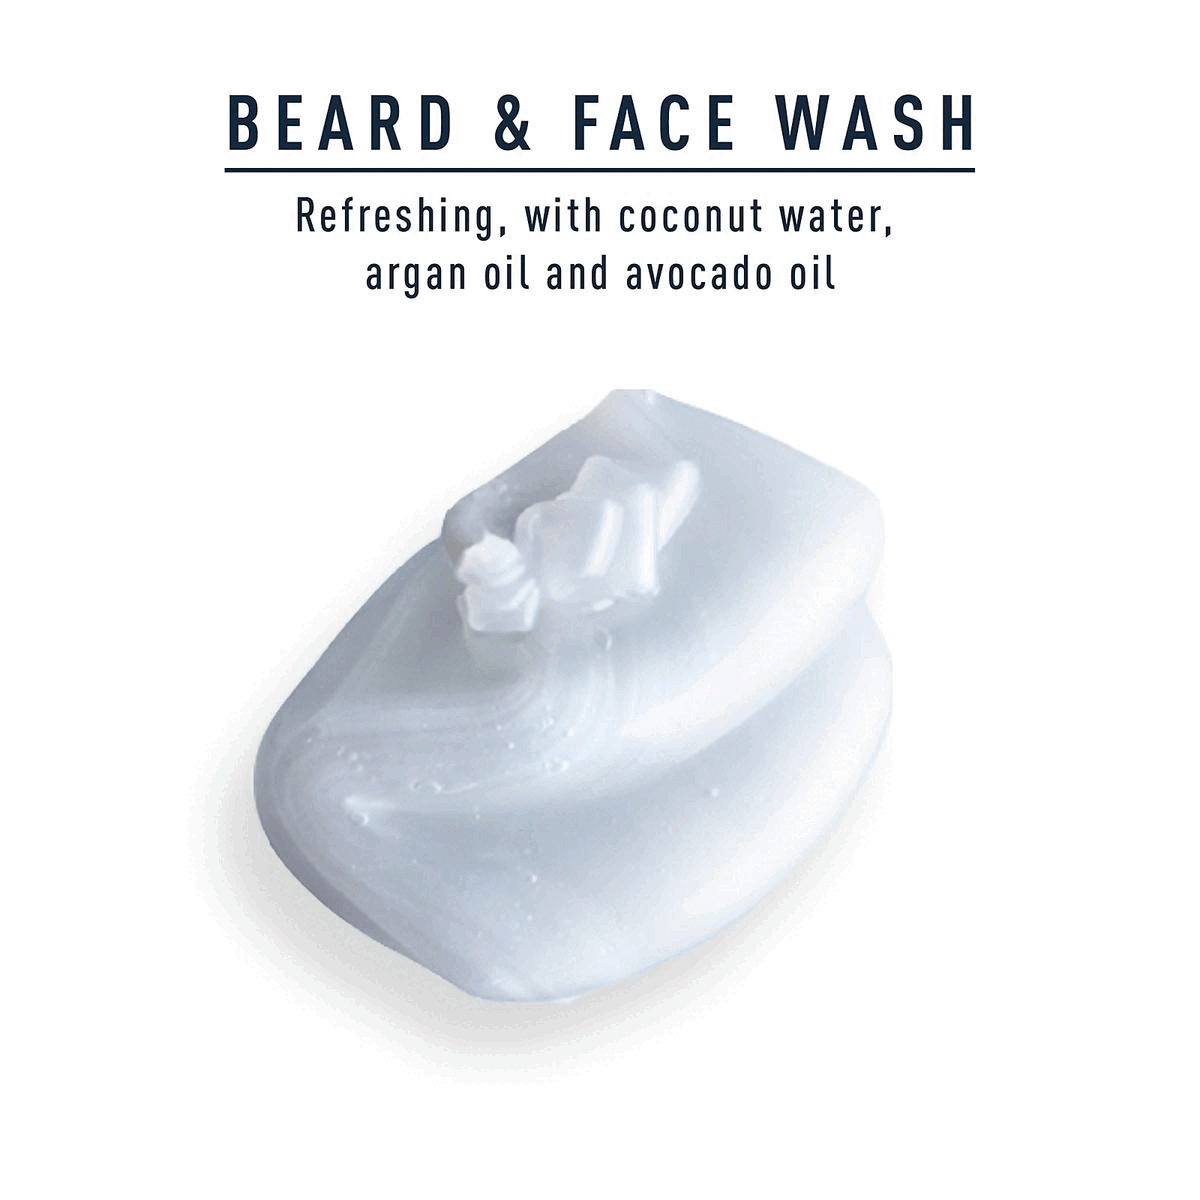 Image 1 BEARD & FACE WASH Refreshing, with coconut water,argan oil and avocado oil Image 2 BEARD OIL Softening with plant based argan, joijoba, avocado, aacadamia seed and almond oils
                                  130ml Image 3 SOFT BEARD BALM Conditioning with cocoa butter,
                                  argan oil and shea butter